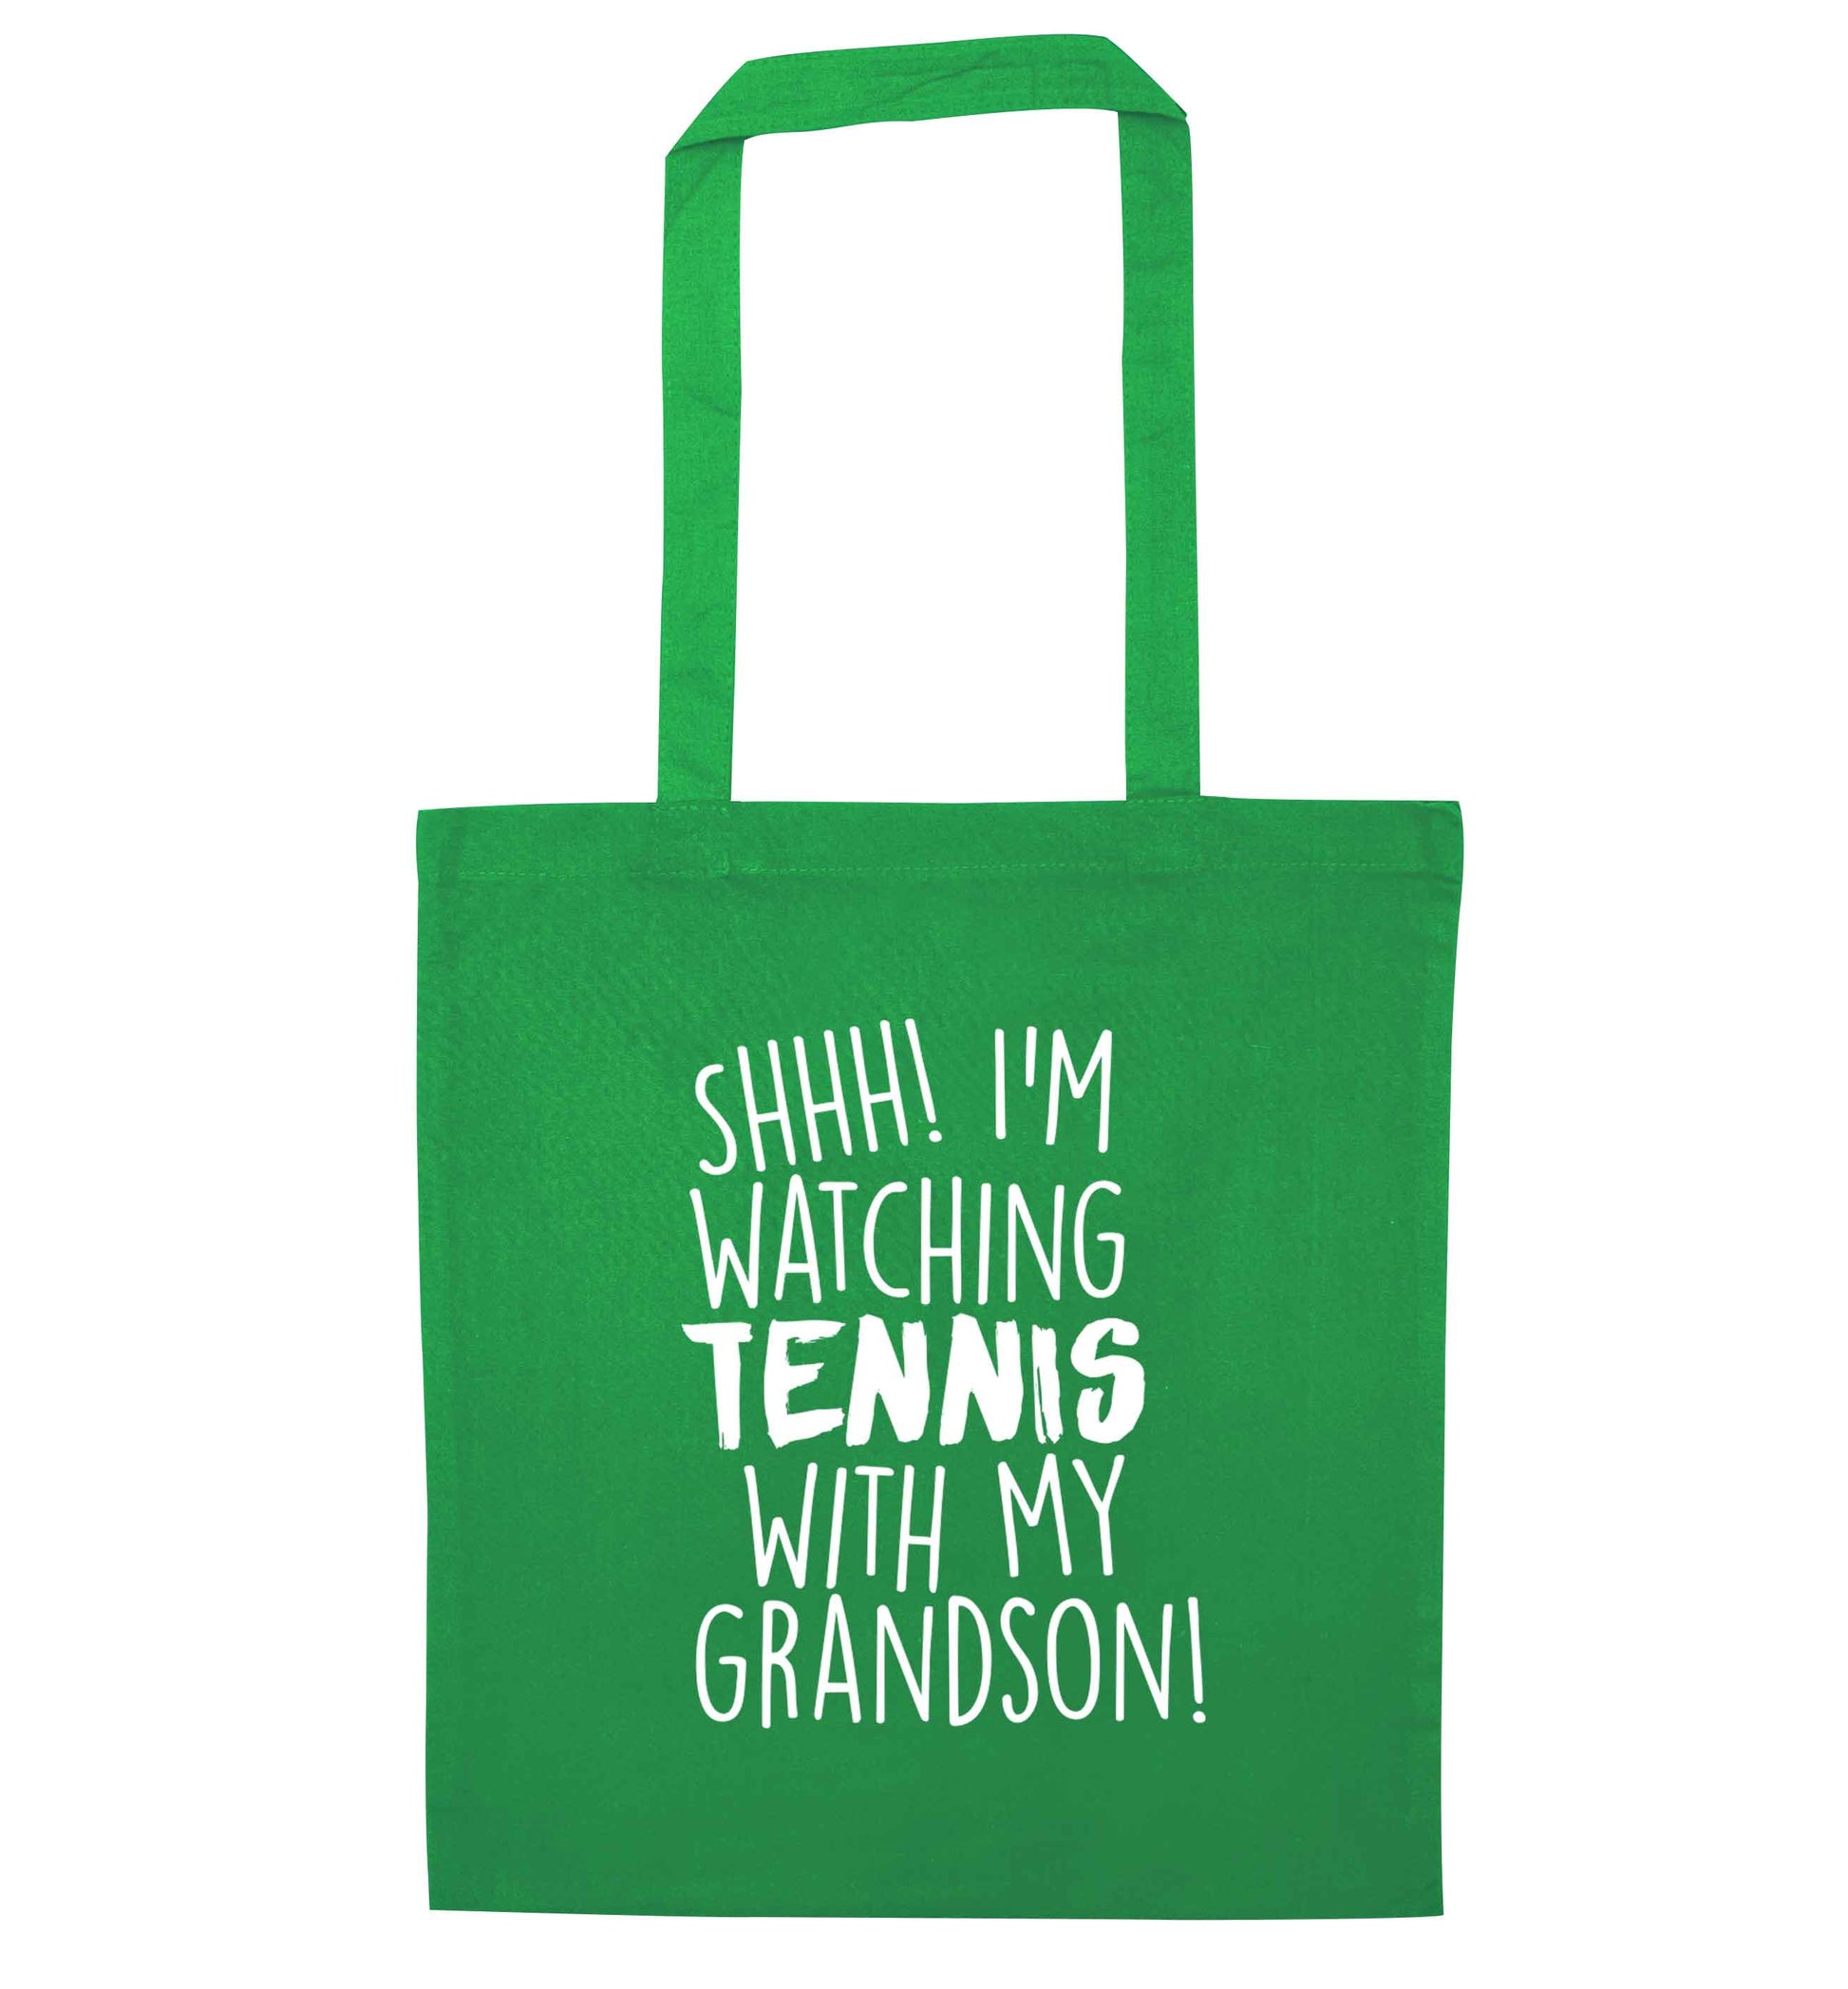 Shh! I'm watching tennis with my grandson! green tote bag